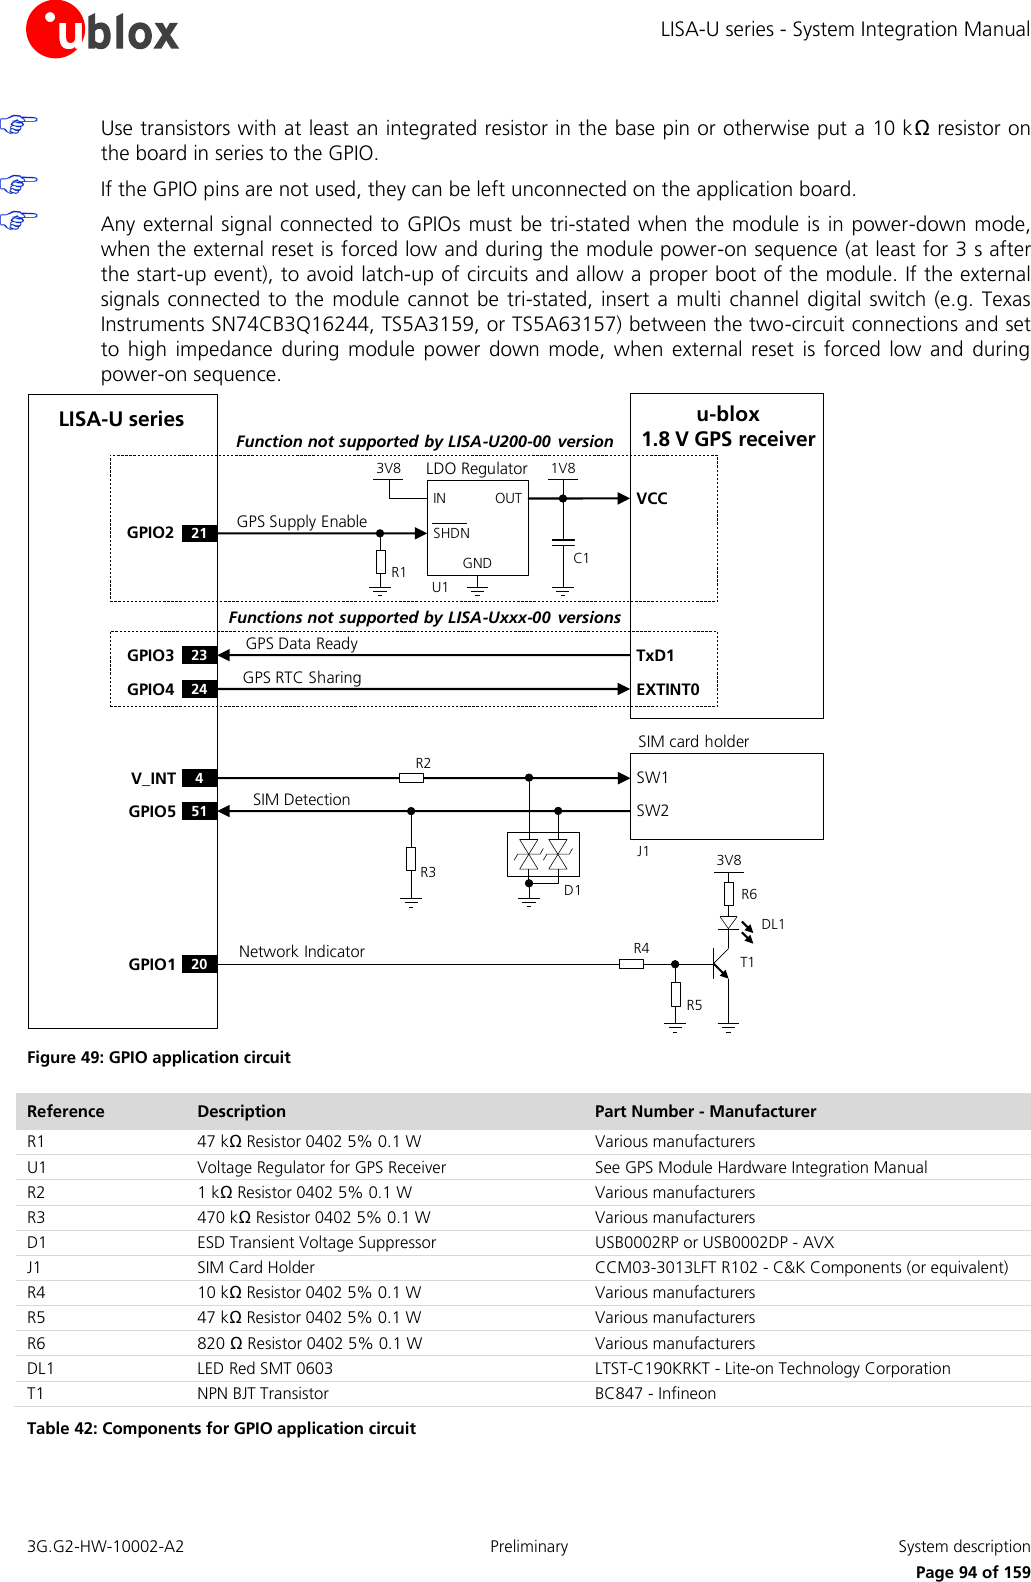 LISA-U series - System Integration Manual 3G.G2-HW-10002-A2  Preliminary  System description      Page 94 of 159  Use transistors with at least an integrated resistor in the base pin or otherwise put a 10 kΩ resistor on the board in series to the GPIO.  If the GPIO pins are not used, they can be left unconnected on the application board.  Any external signal connected to GPIOs must be tri-stated when the module is in power-down mode, when the external reset is forced low and during the module power-on sequence (at least for 3 s after the start-up event), to avoid latch-up of circuits and allow a proper boot of the module. If the external signals connected to the  module cannot be  tri-stated,  insert a  multi channel digital switch (e.g. Texas Instruments SN74CB3Q16244, TS5A3159, or TS5A63157) between the two-circuit connections and set to  high impedance  during  module  power  down  mode,  when external  reset  is forced  low  and  during power-on sequence. SIM card holderSW1 SW2 4V_INT51GPIO5R3R2OUTINGNDLDO RegulatorSHDN3V8 1V8GPIO3GPIO4TxD1EXTINT02324R1VCCGPIO2 21LISA-U series u-blox1.8 V GPS receiverU1J1C1R4R63V8Network IndicatorR5GPS Supply EnableGPS Data ReadyGPS RTC SharingSIM Detection20GPIO1DL1T1D1Functions not supported by LISA-Uxxx-00  versionsFunction not supported by LISA-U200-00  version Figure 49: GPIO application circuit Reference Description Part Number - Manufacturer R1 47 kΩ Resistor 0402 5% 0.1 W Various manufacturers U1 Voltage Regulator for GPS Receiver See GPS Module Hardware Integration Manual R2 1 kΩ Resistor 0402 5% 0.1 W Various manufacturers R3 470 kΩ Resistor 0402 5% 0.1 W Various manufacturers D1 ESD Transient Voltage Suppressor USB0002RP or USB0002DP - AVX J1 SIM Card Holder CCM03-3013LFT R102 - C&amp;K Components (or equivalent) R4 10 kΩ Resistor 0402 5% 0.1 W Various manufacturers R5 47 kΩ Resistor 0402 5% 0.1 W Various manufacturers R6 820 Ω Resistor 0402 5% 0.1 W Various manufacturers DL1 LED Red SMT 0603 LTST-C190KRKT - Lite-on Technology Corporation T1 NPN BJT Transistor  BC847 - Infineon Table 42: Components for GPIO application circuit  